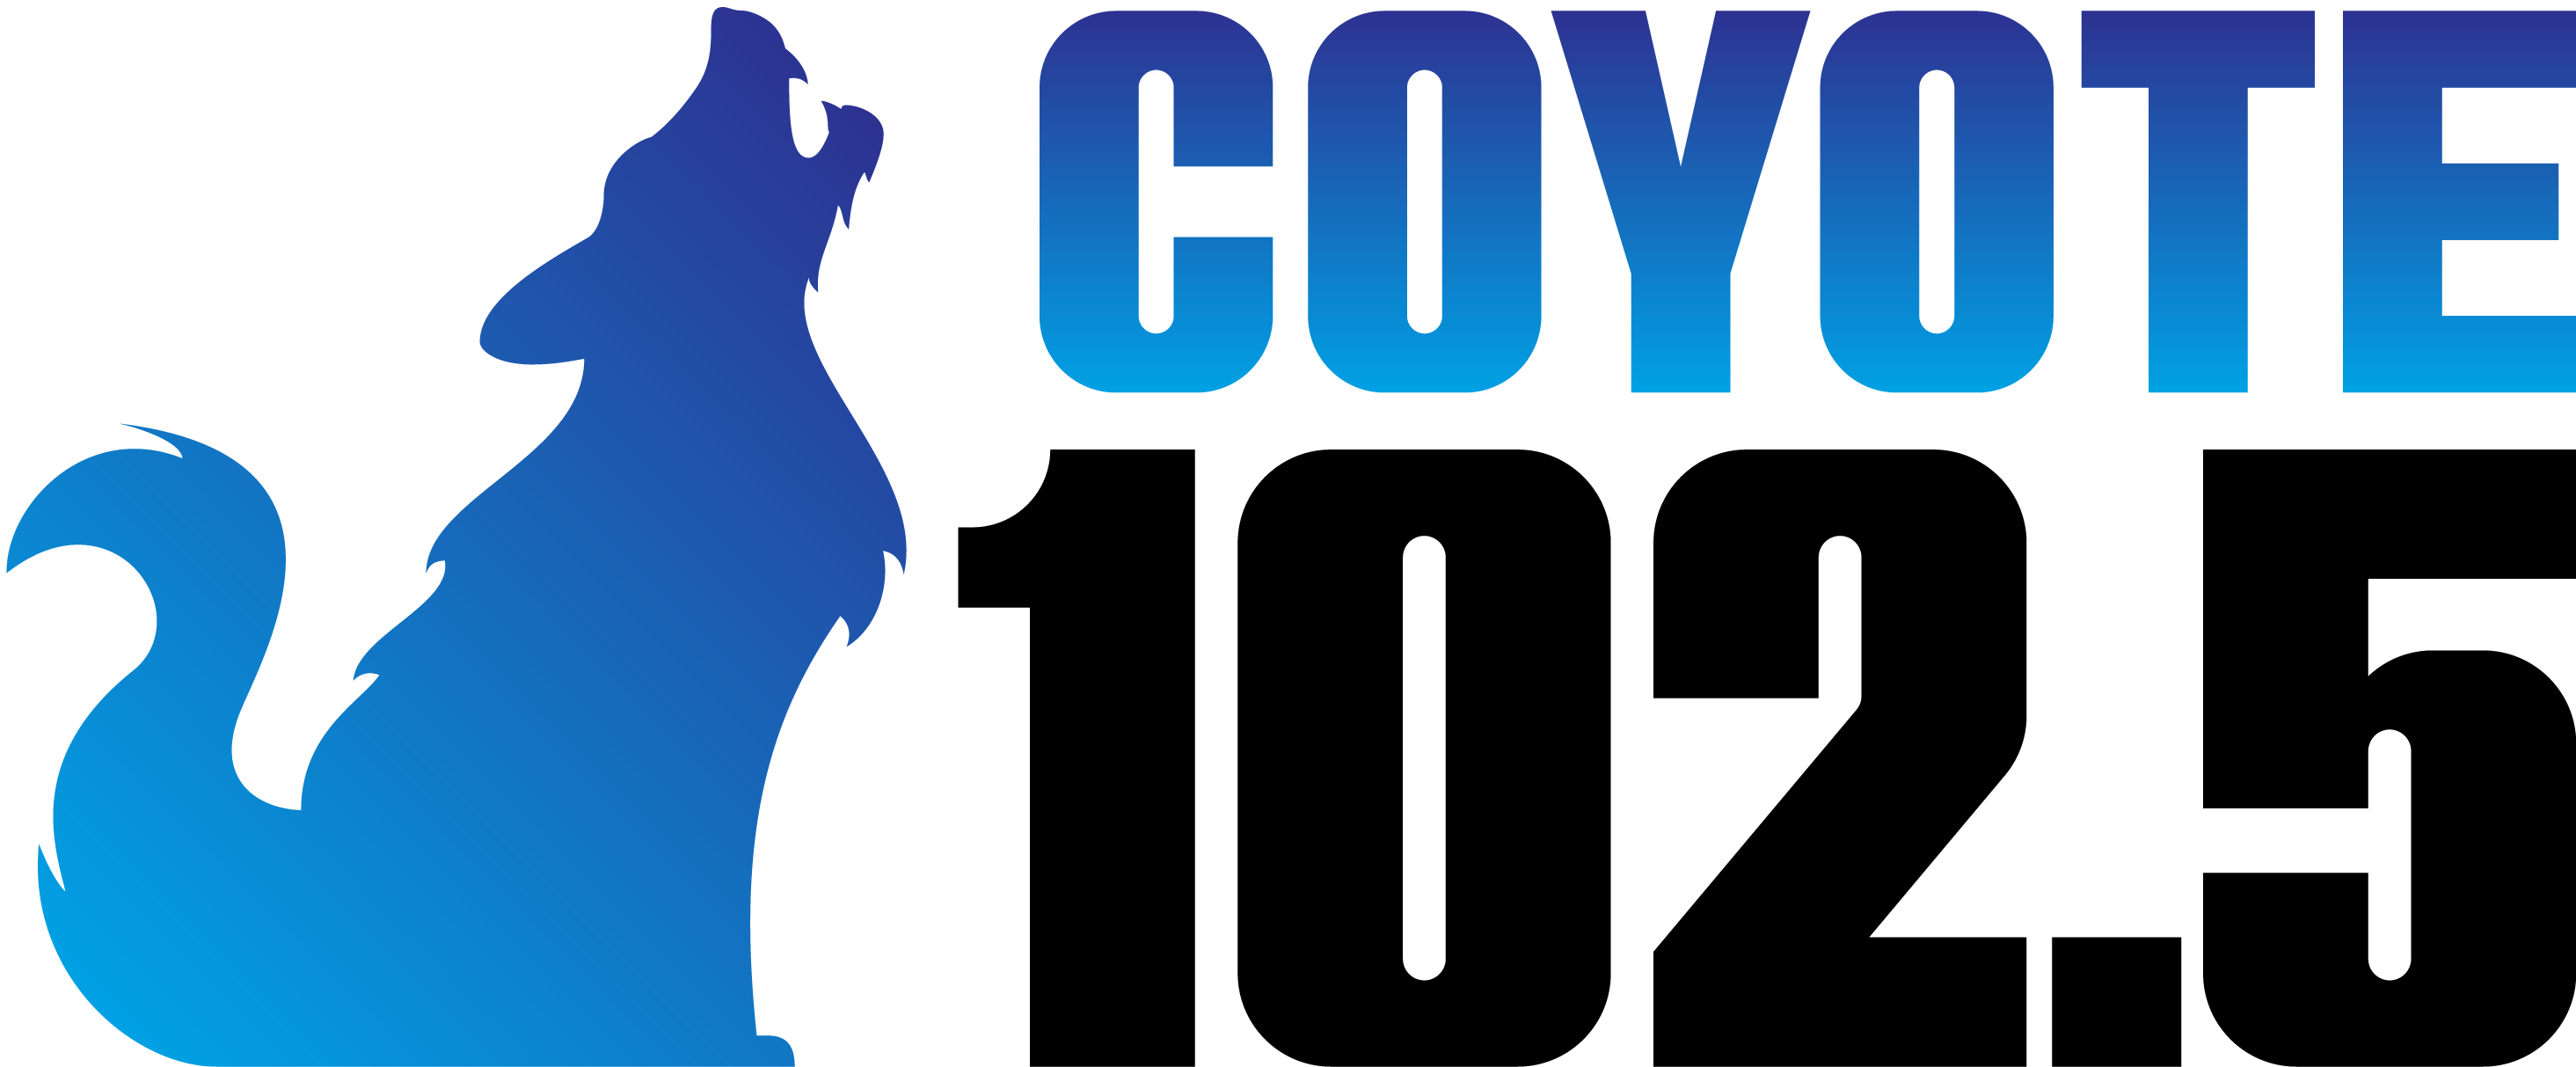 102.5Coyote - Community Business Partners - Animal Humane New Mexico